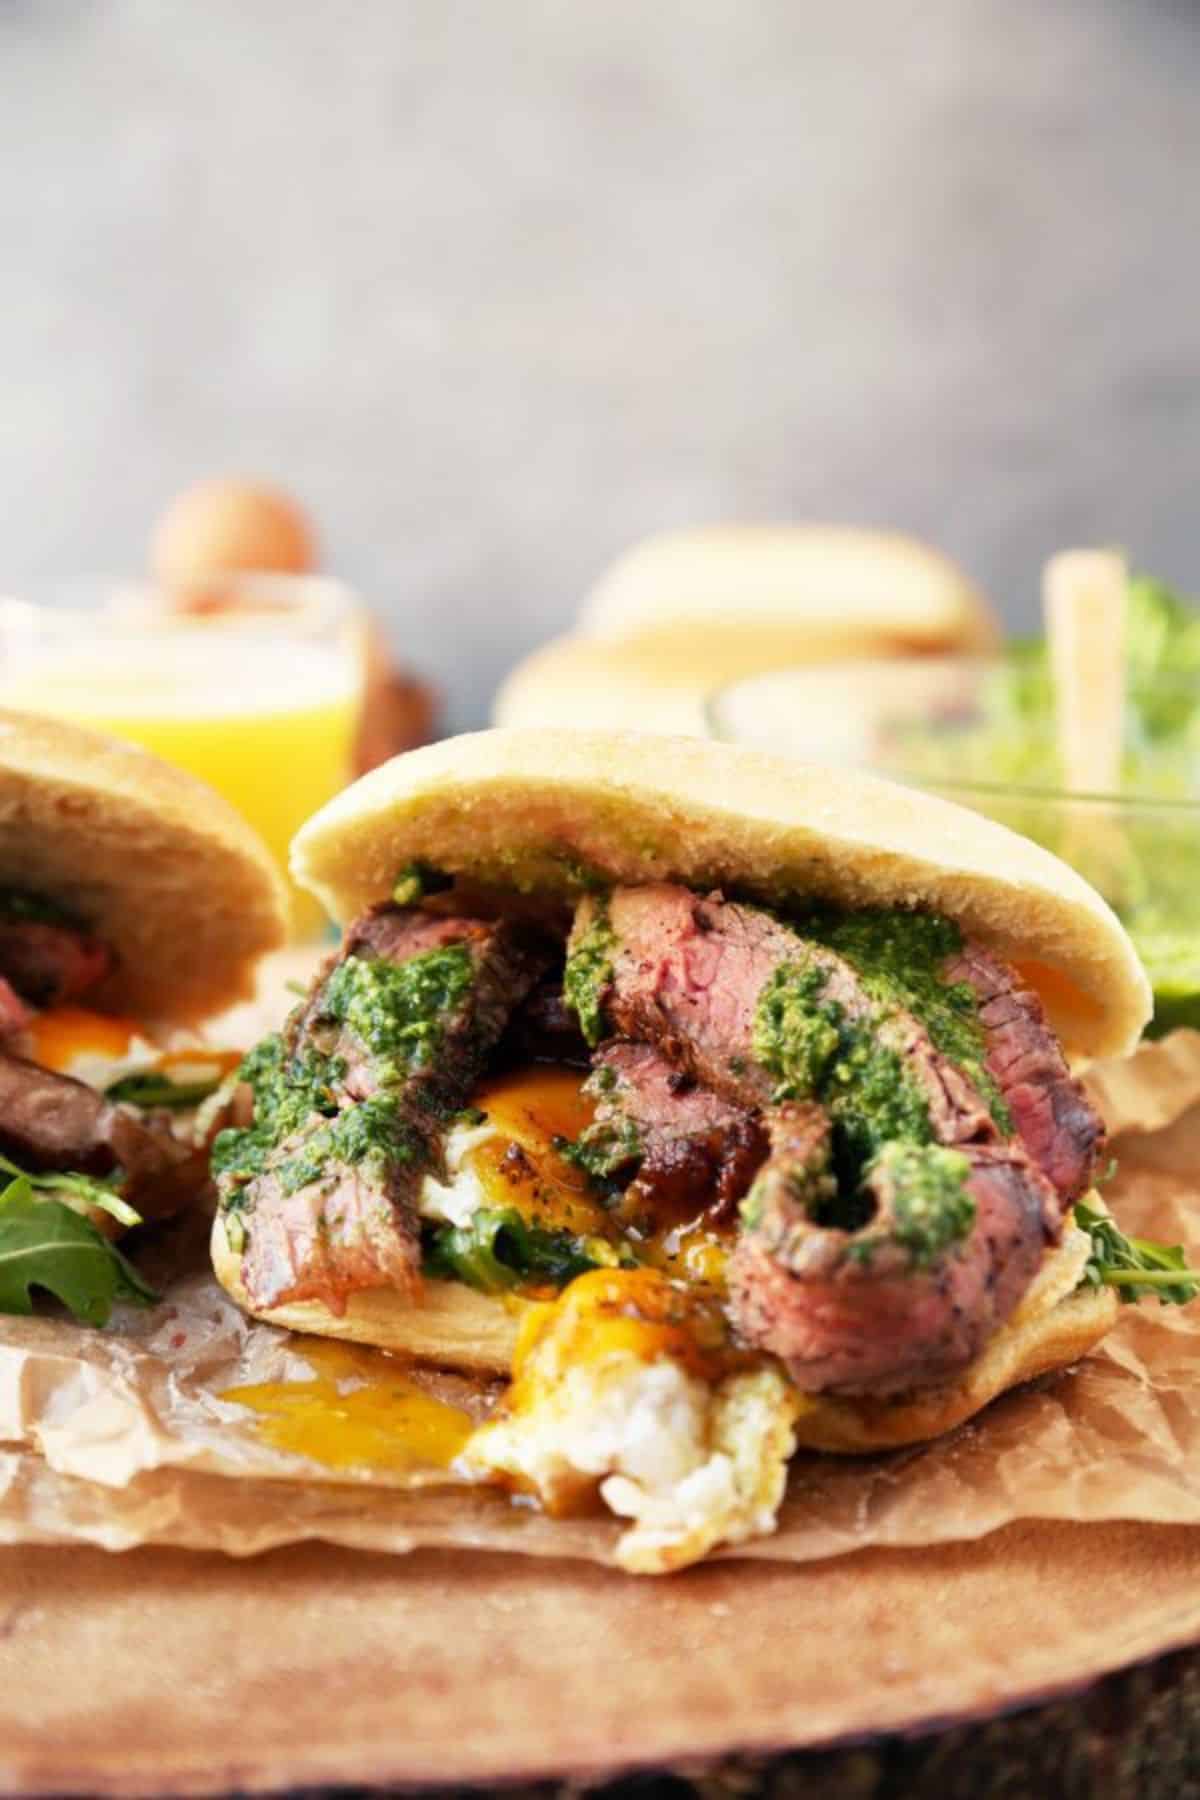 Mouth-watering steak and egg sandwich on a wooden tray.